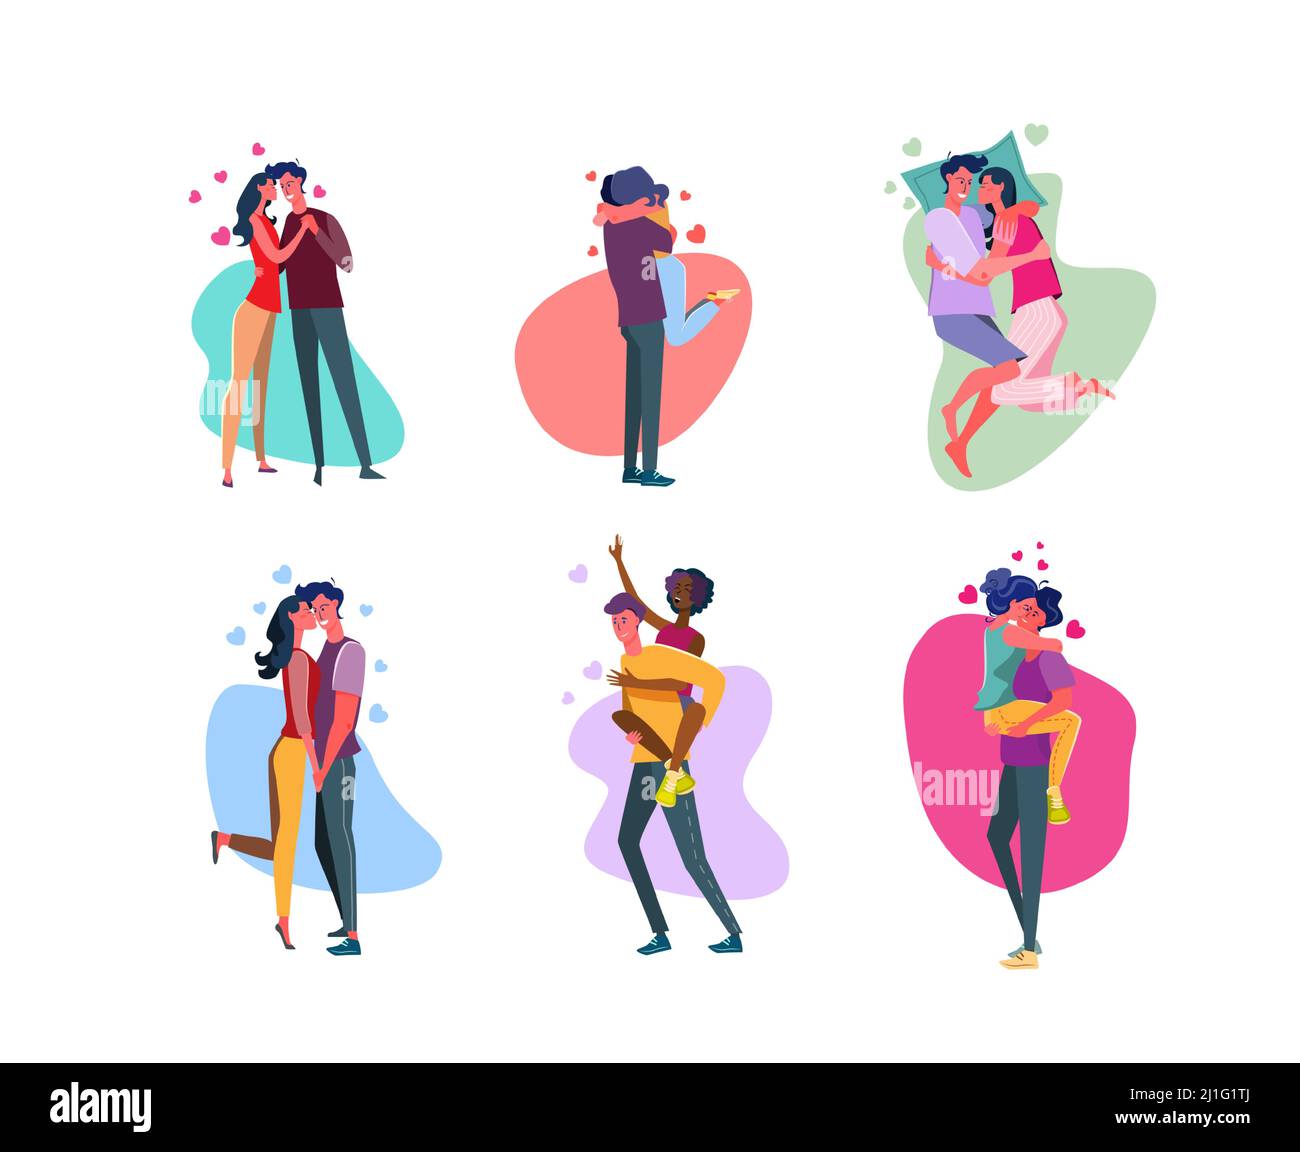 Set of affectionate couples embracing in love. Happy young men and women lovers hugging, holding hands, kissing, dating together. Romantic feelings, p Stock Vector